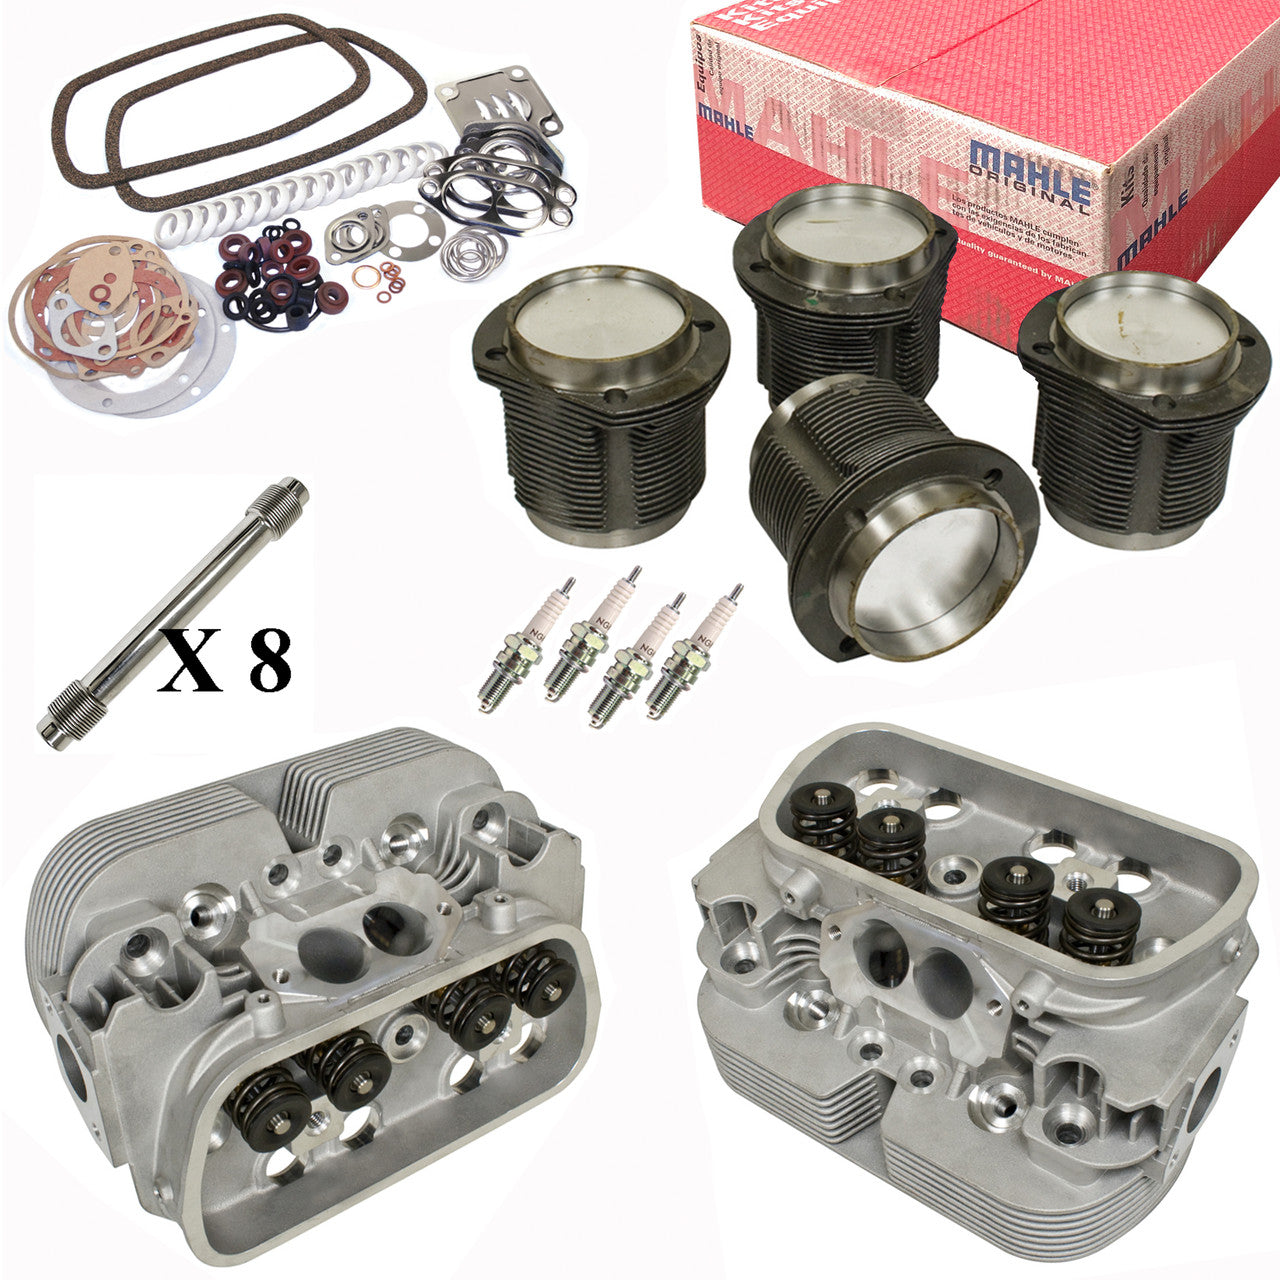 Vw Bug Engine Kit Hi Performance 1914cc With Racing Cylinder Heads Top End Only, Mahle Pistons